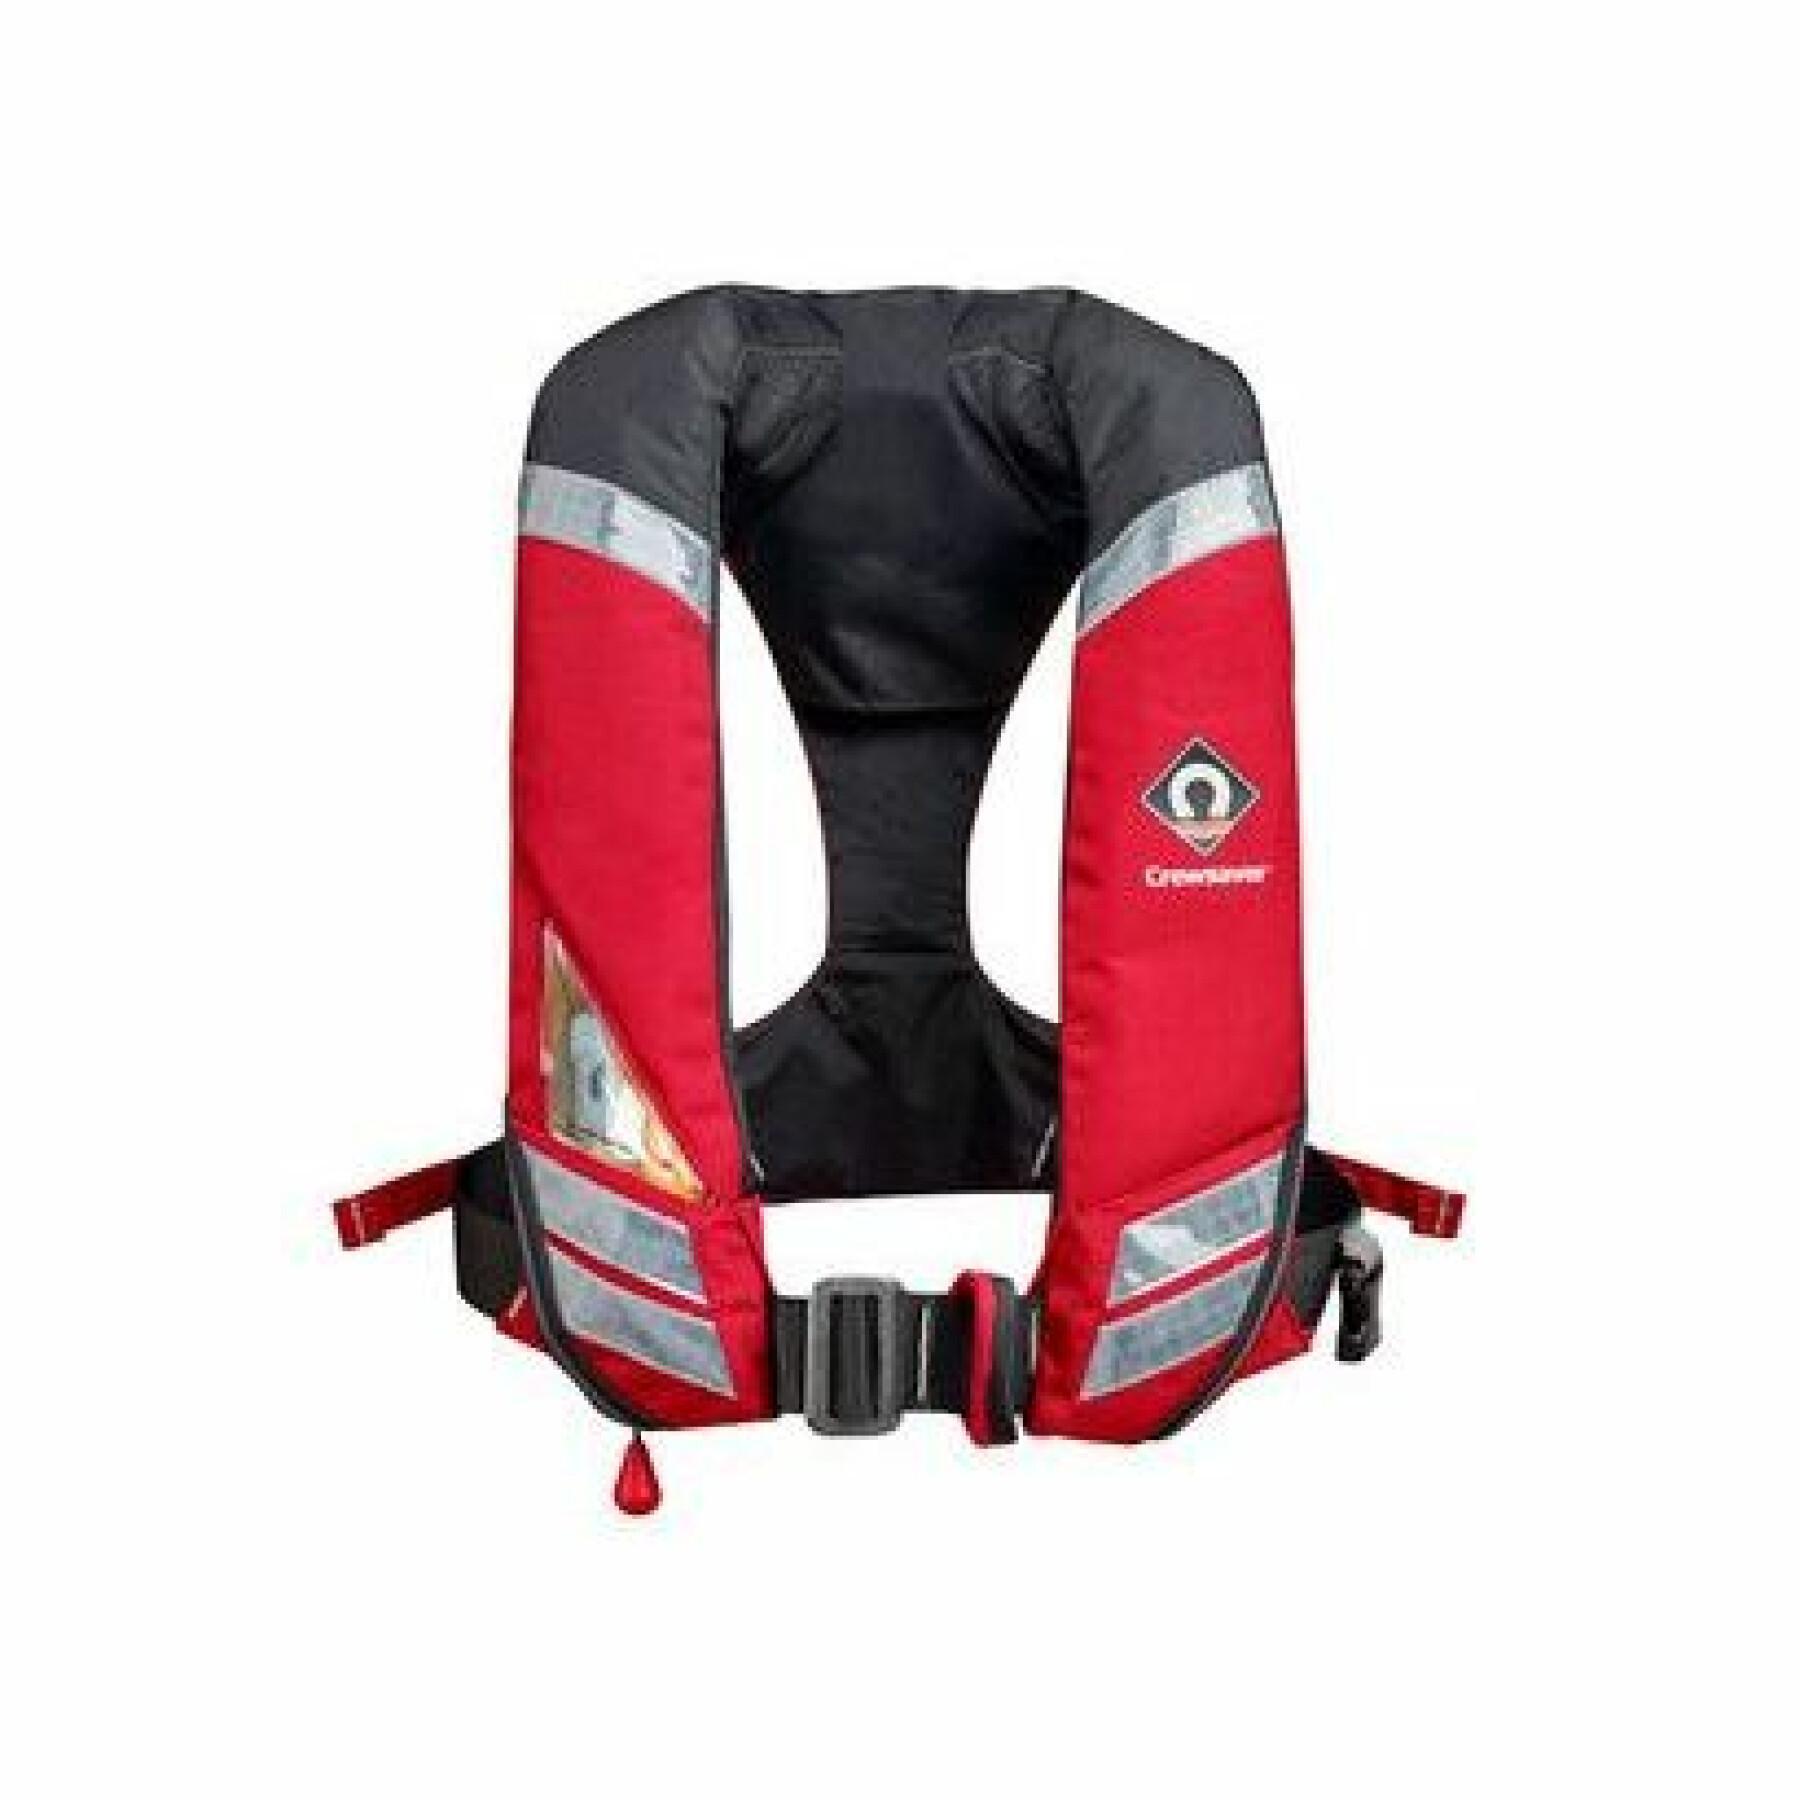 Automatic lifejacket with harness Crewsaver Crewfit 180N HD